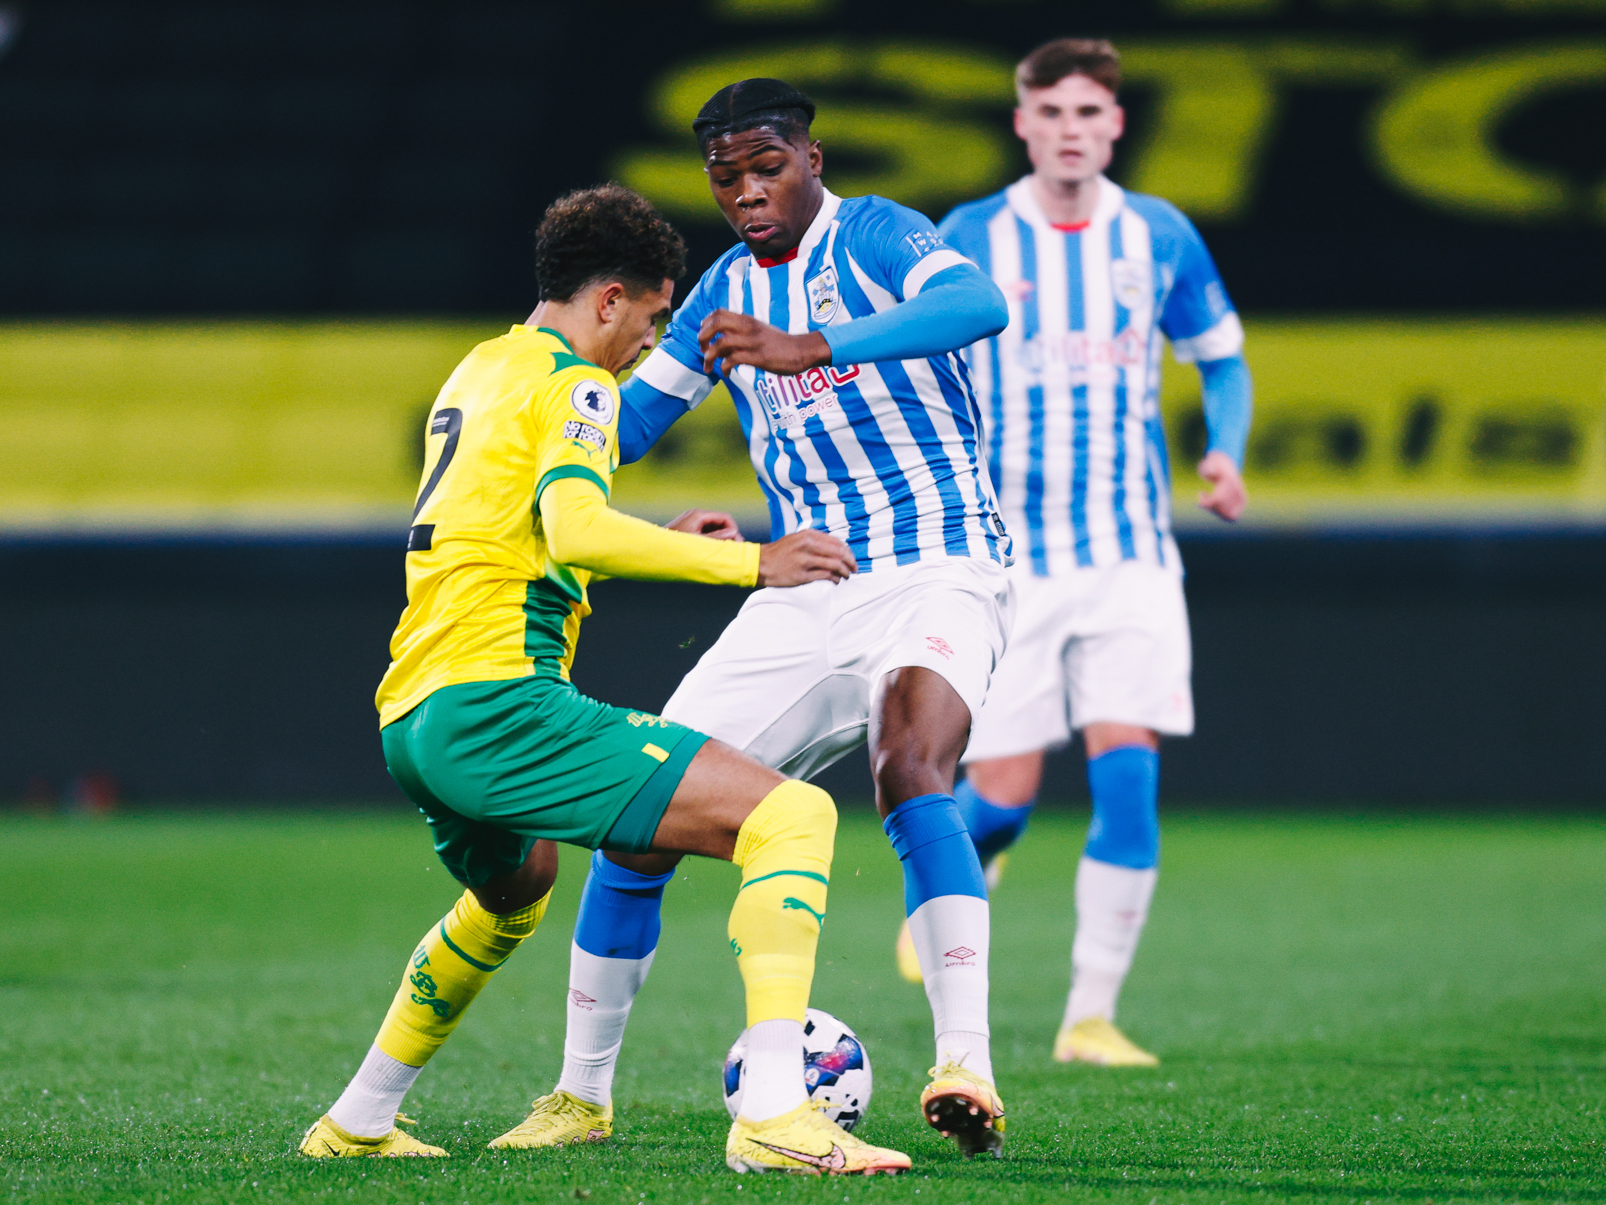 Ethan Ingram challenges a Huddersfield Town defender for the ball in the Premier League Cup